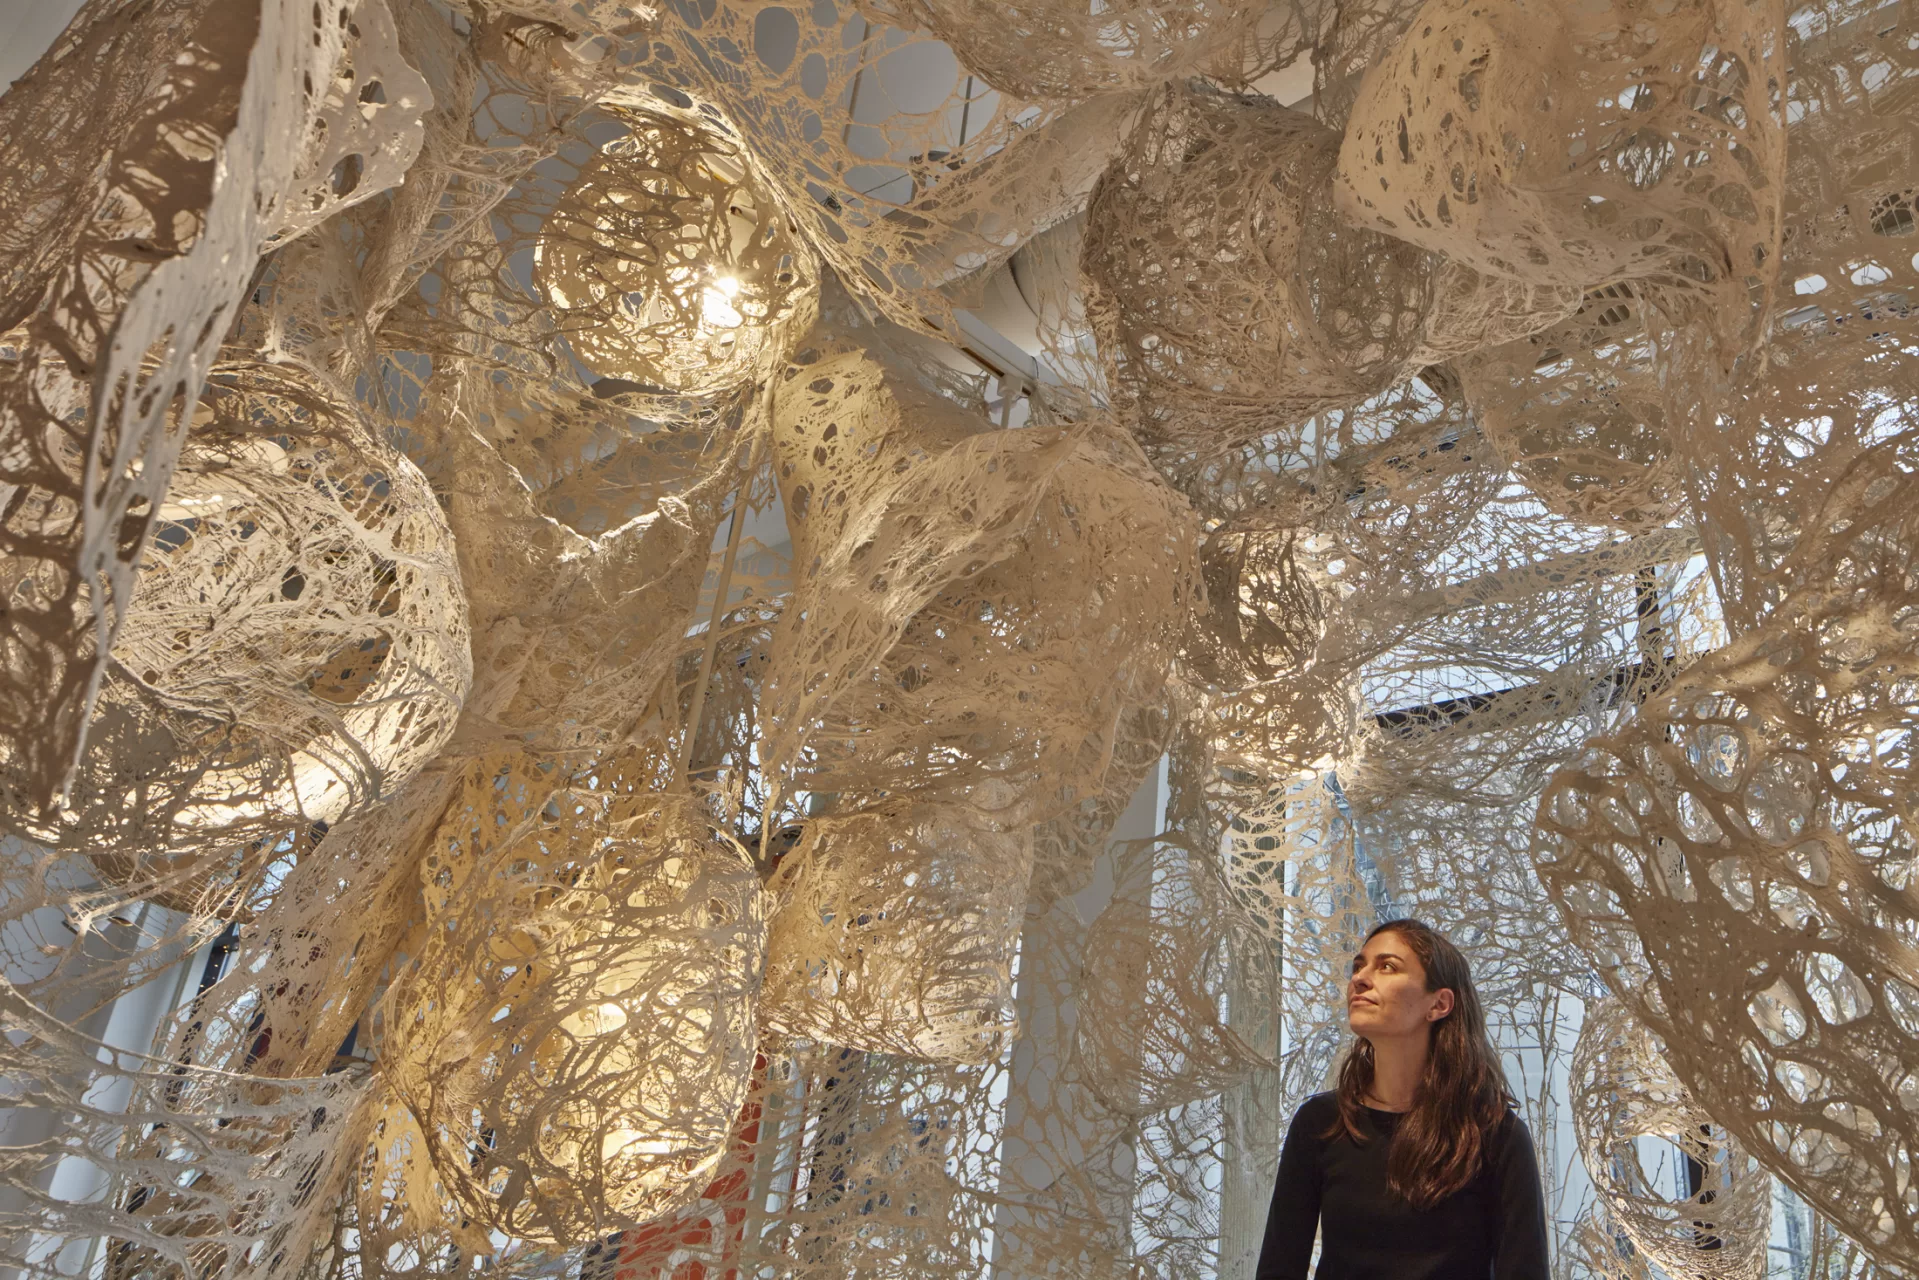 Katy Rodden Walker '07, inside her installation, "Enmeshed." Photo by Charles Mayer Photography.